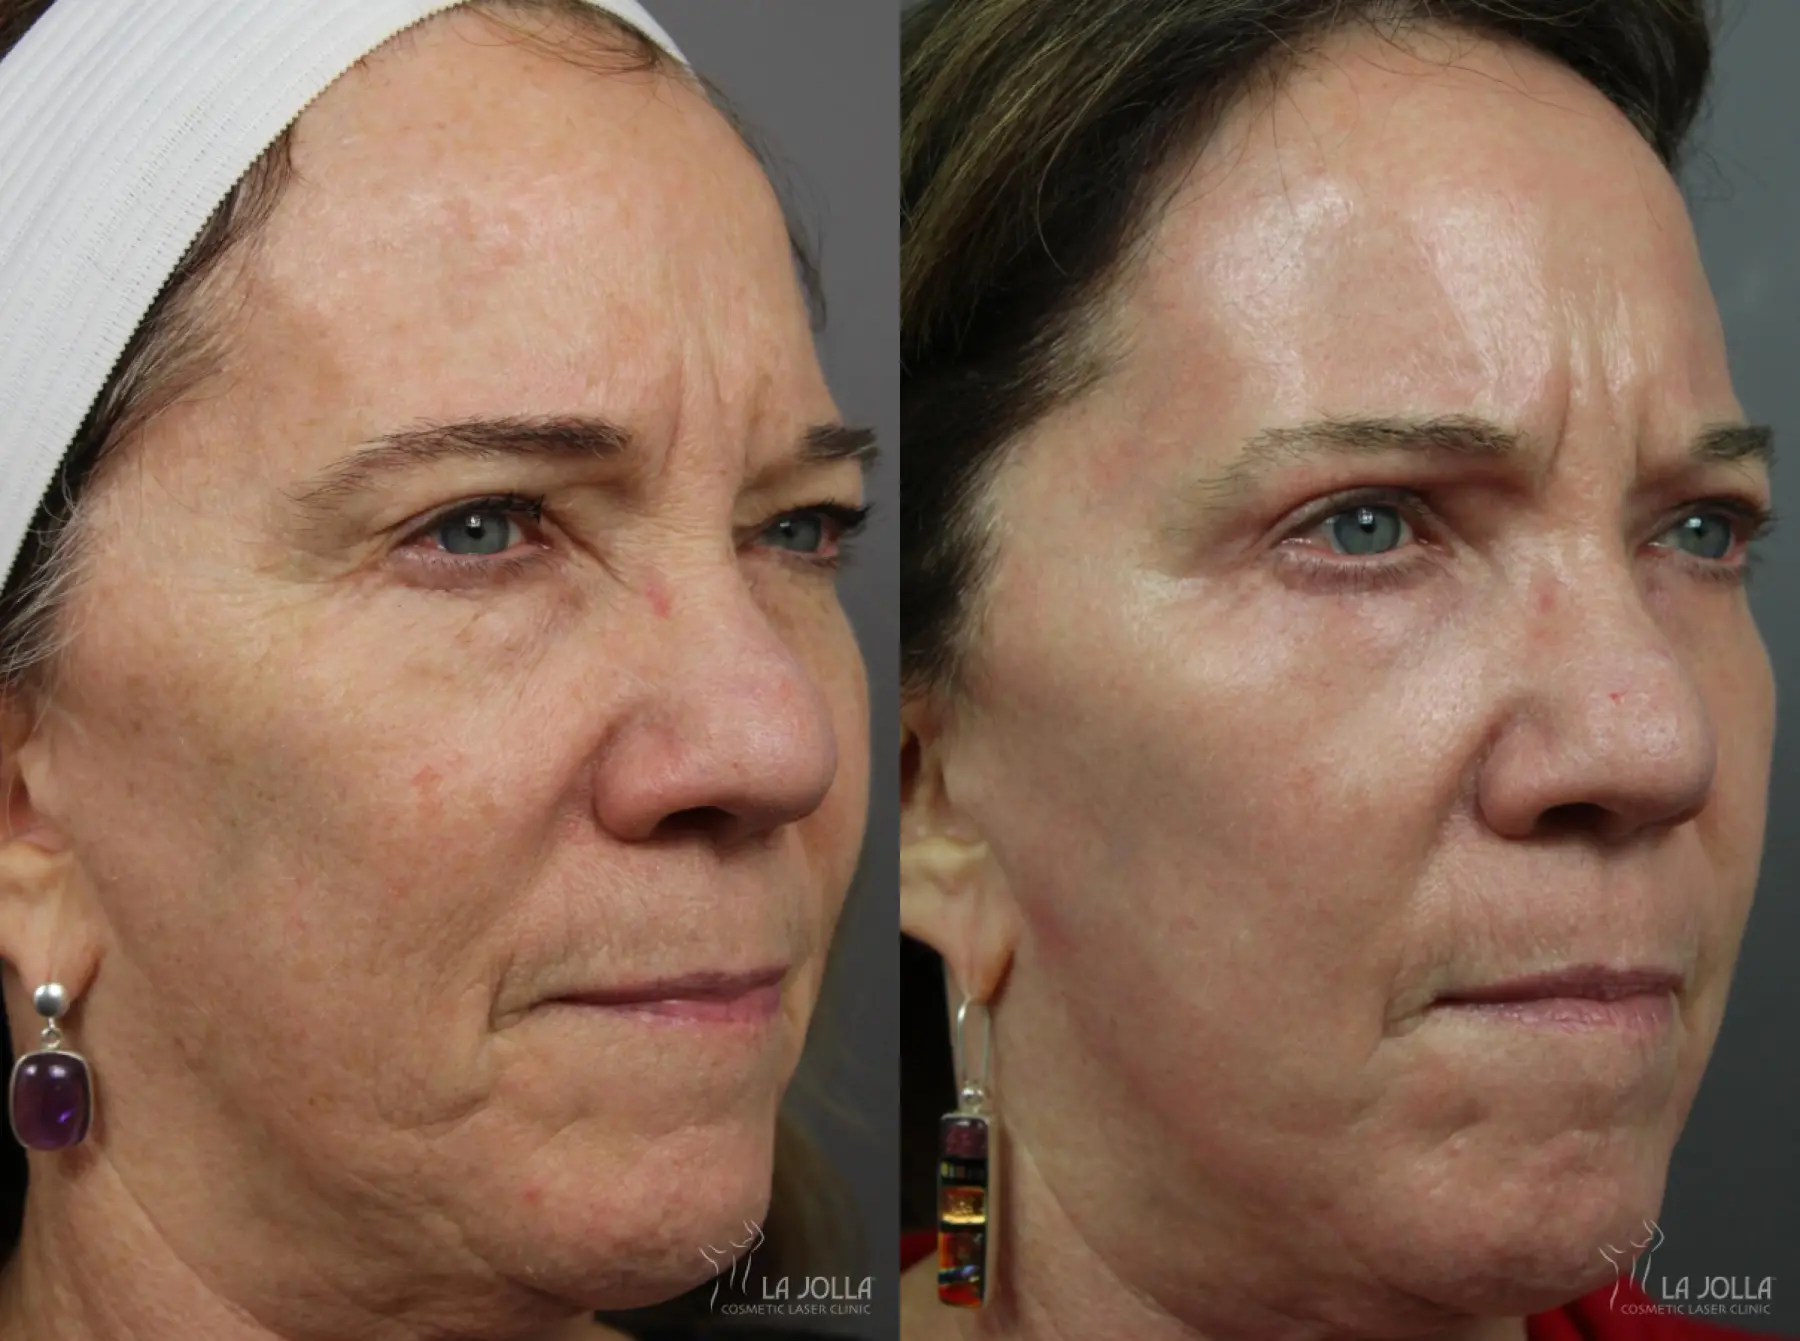 CO2 Laser: Patient 2 - Before and After 3